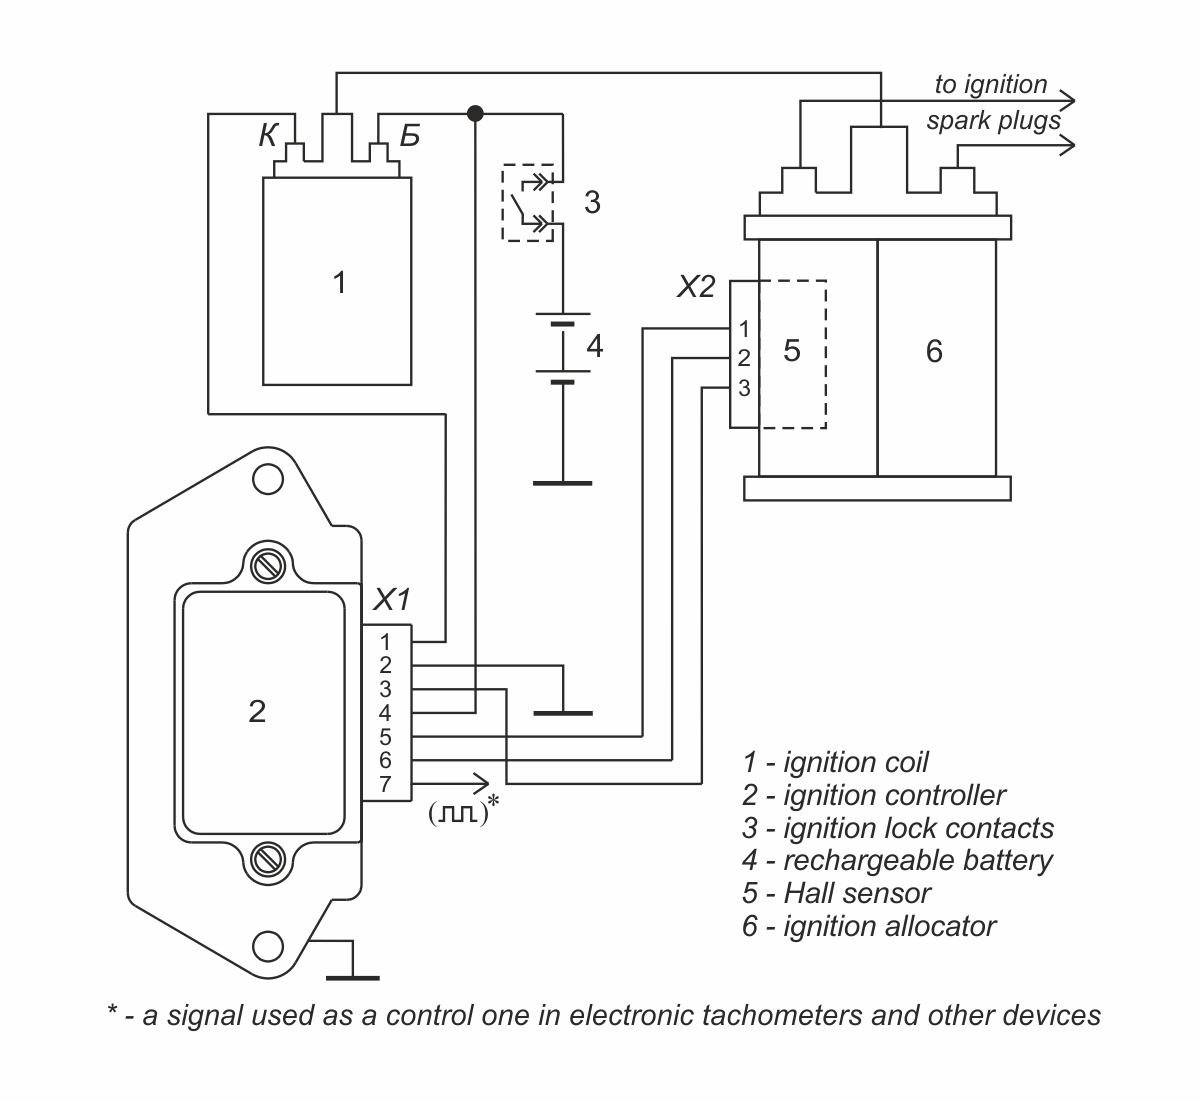 Connection diagram of ignition controller 0729.3734